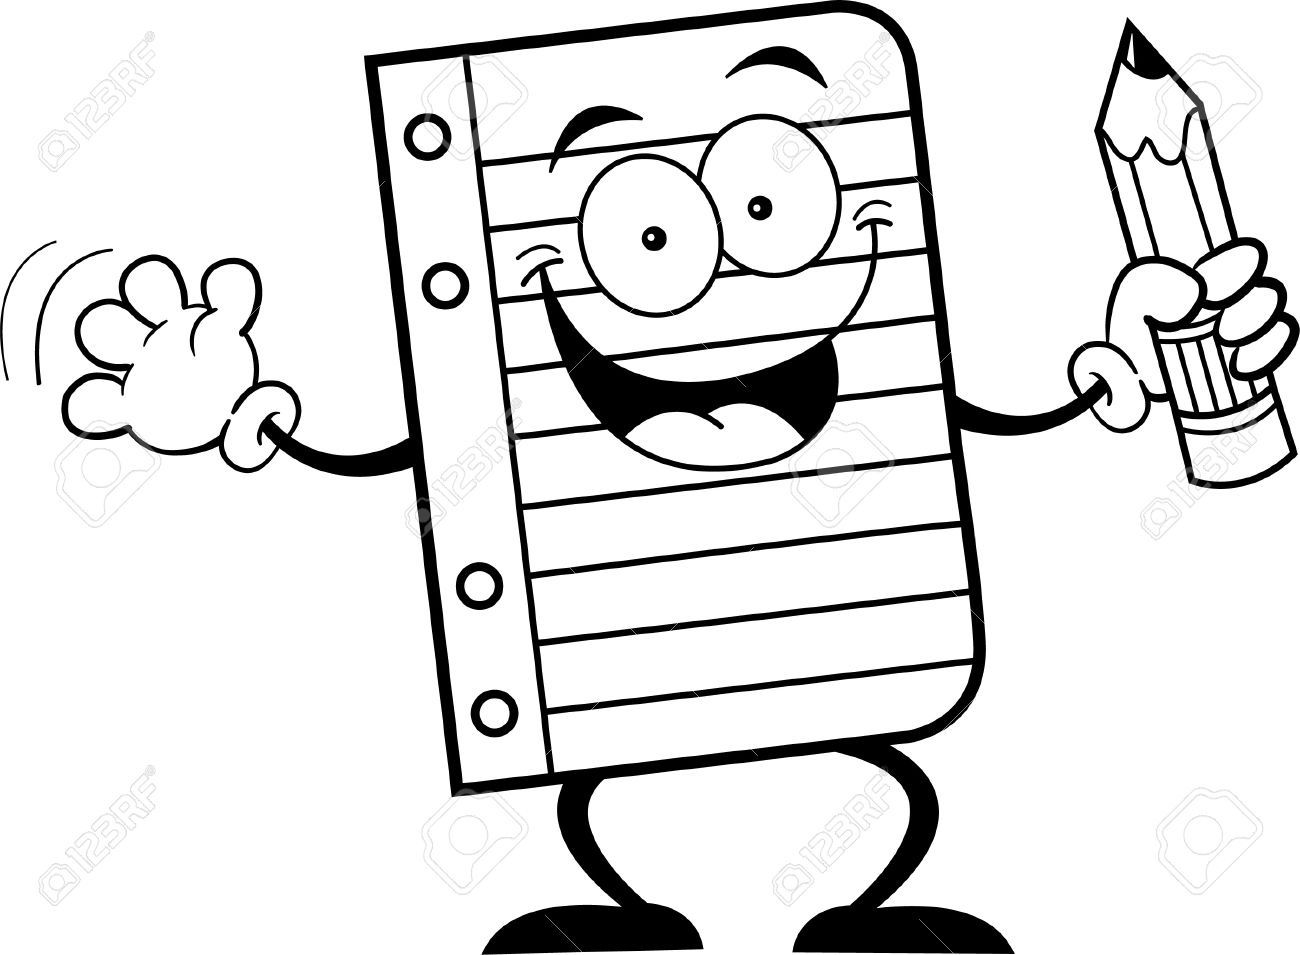 Black And White Illustration Of A Notebook Paper Holding A